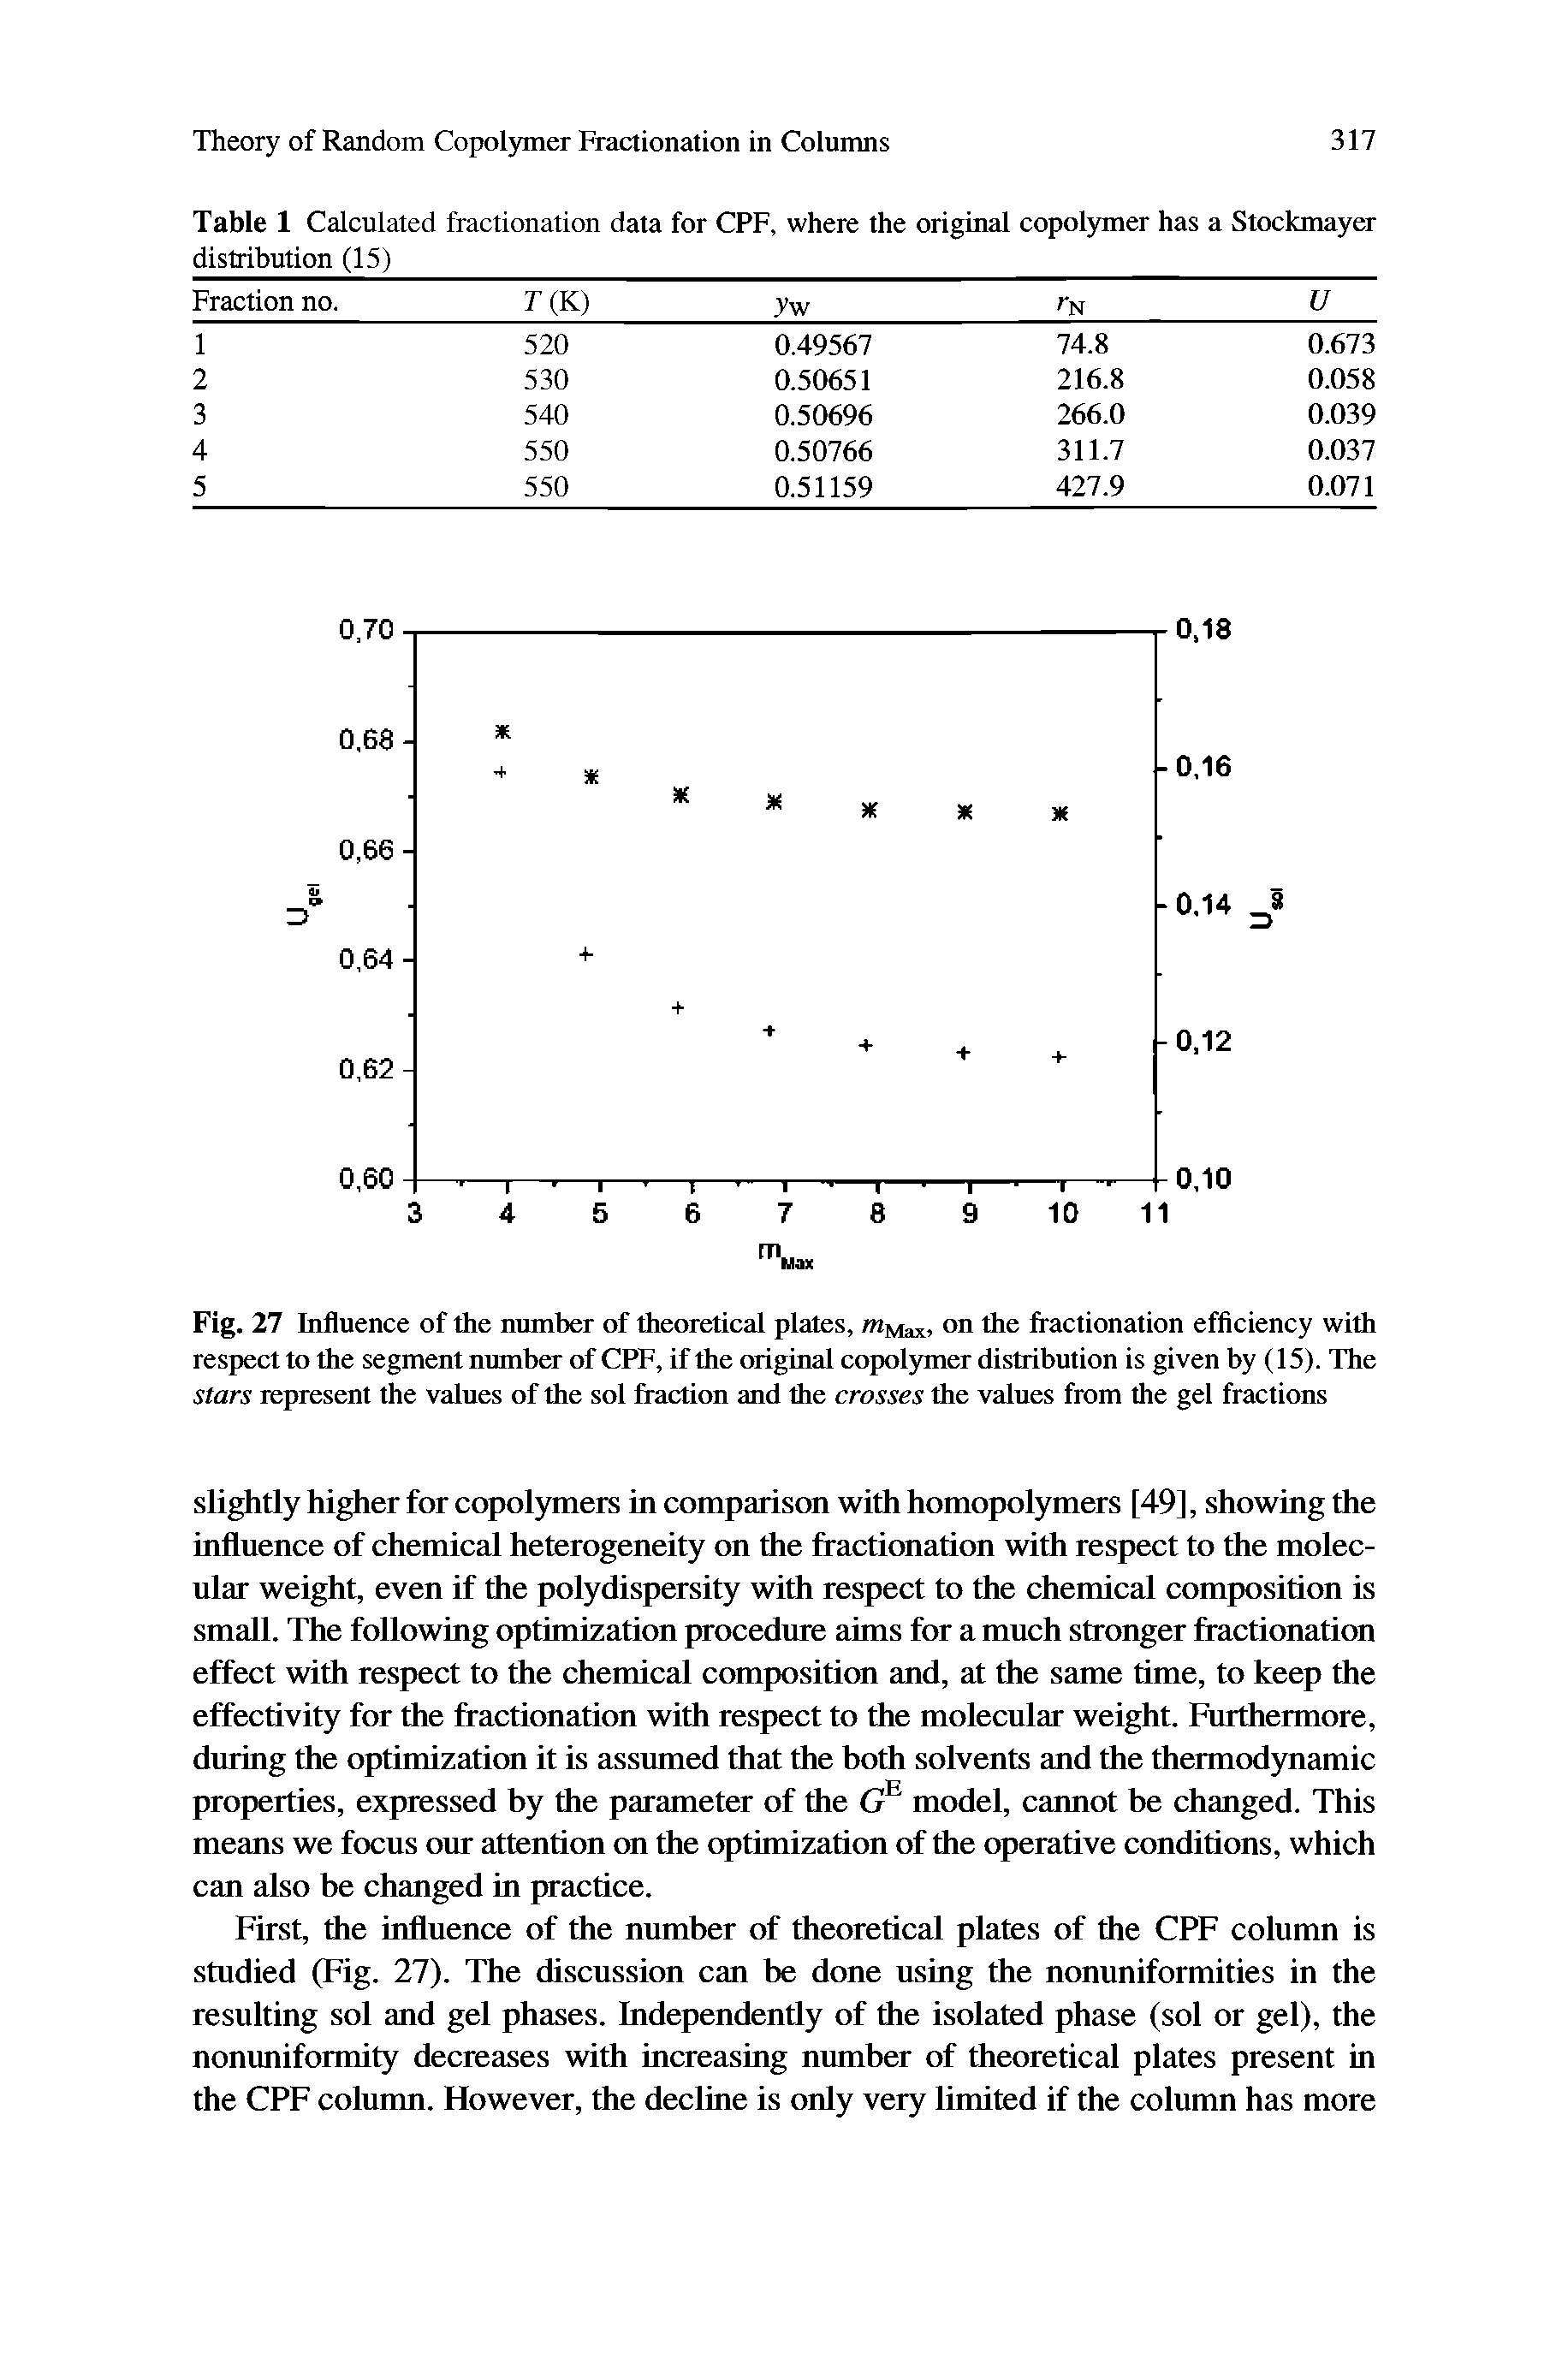 Fig. 27 Influence of the number of theoretical plates, on the fractionation efficiency with respect to the segment number of CPF, if the (uiginal copolymer distribution is given by (15). The stars represent the values of the sol fraction and the crosses the values from the gel fractions...